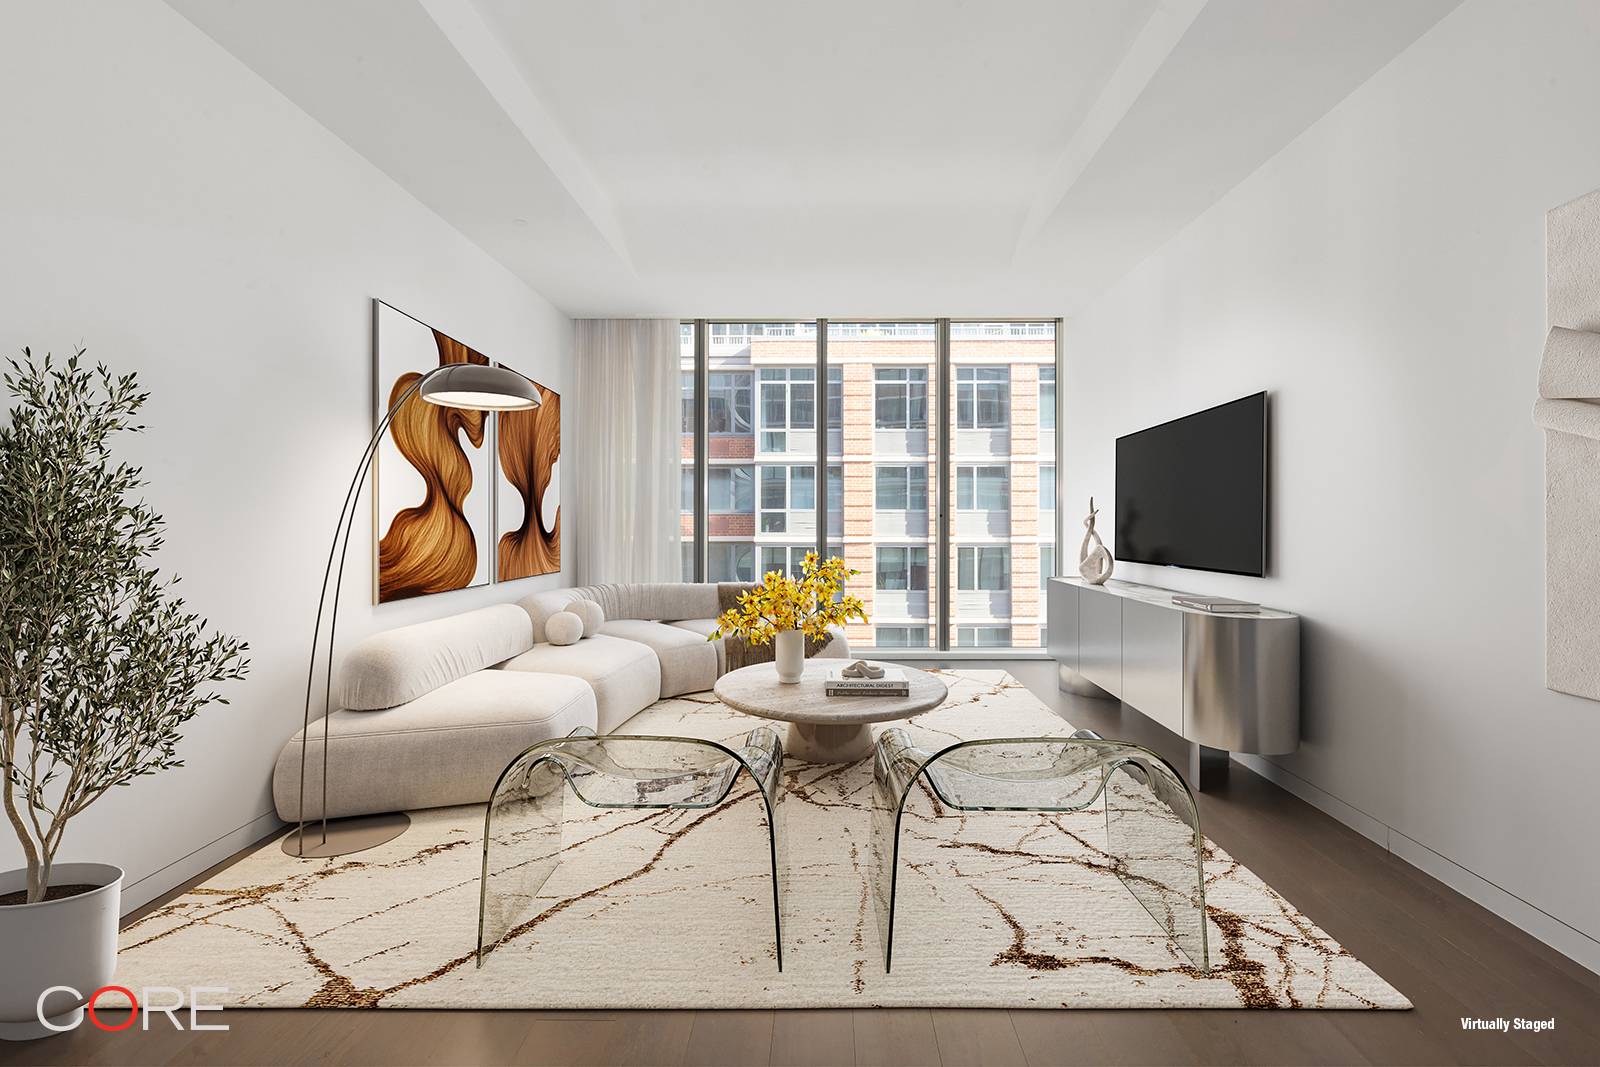 Presenting the opportunity to live in Zaha Hadid s 520 West 28th, is this 1, 717 SF, two bedroom, two and a half bathroom home in West Chelsea.